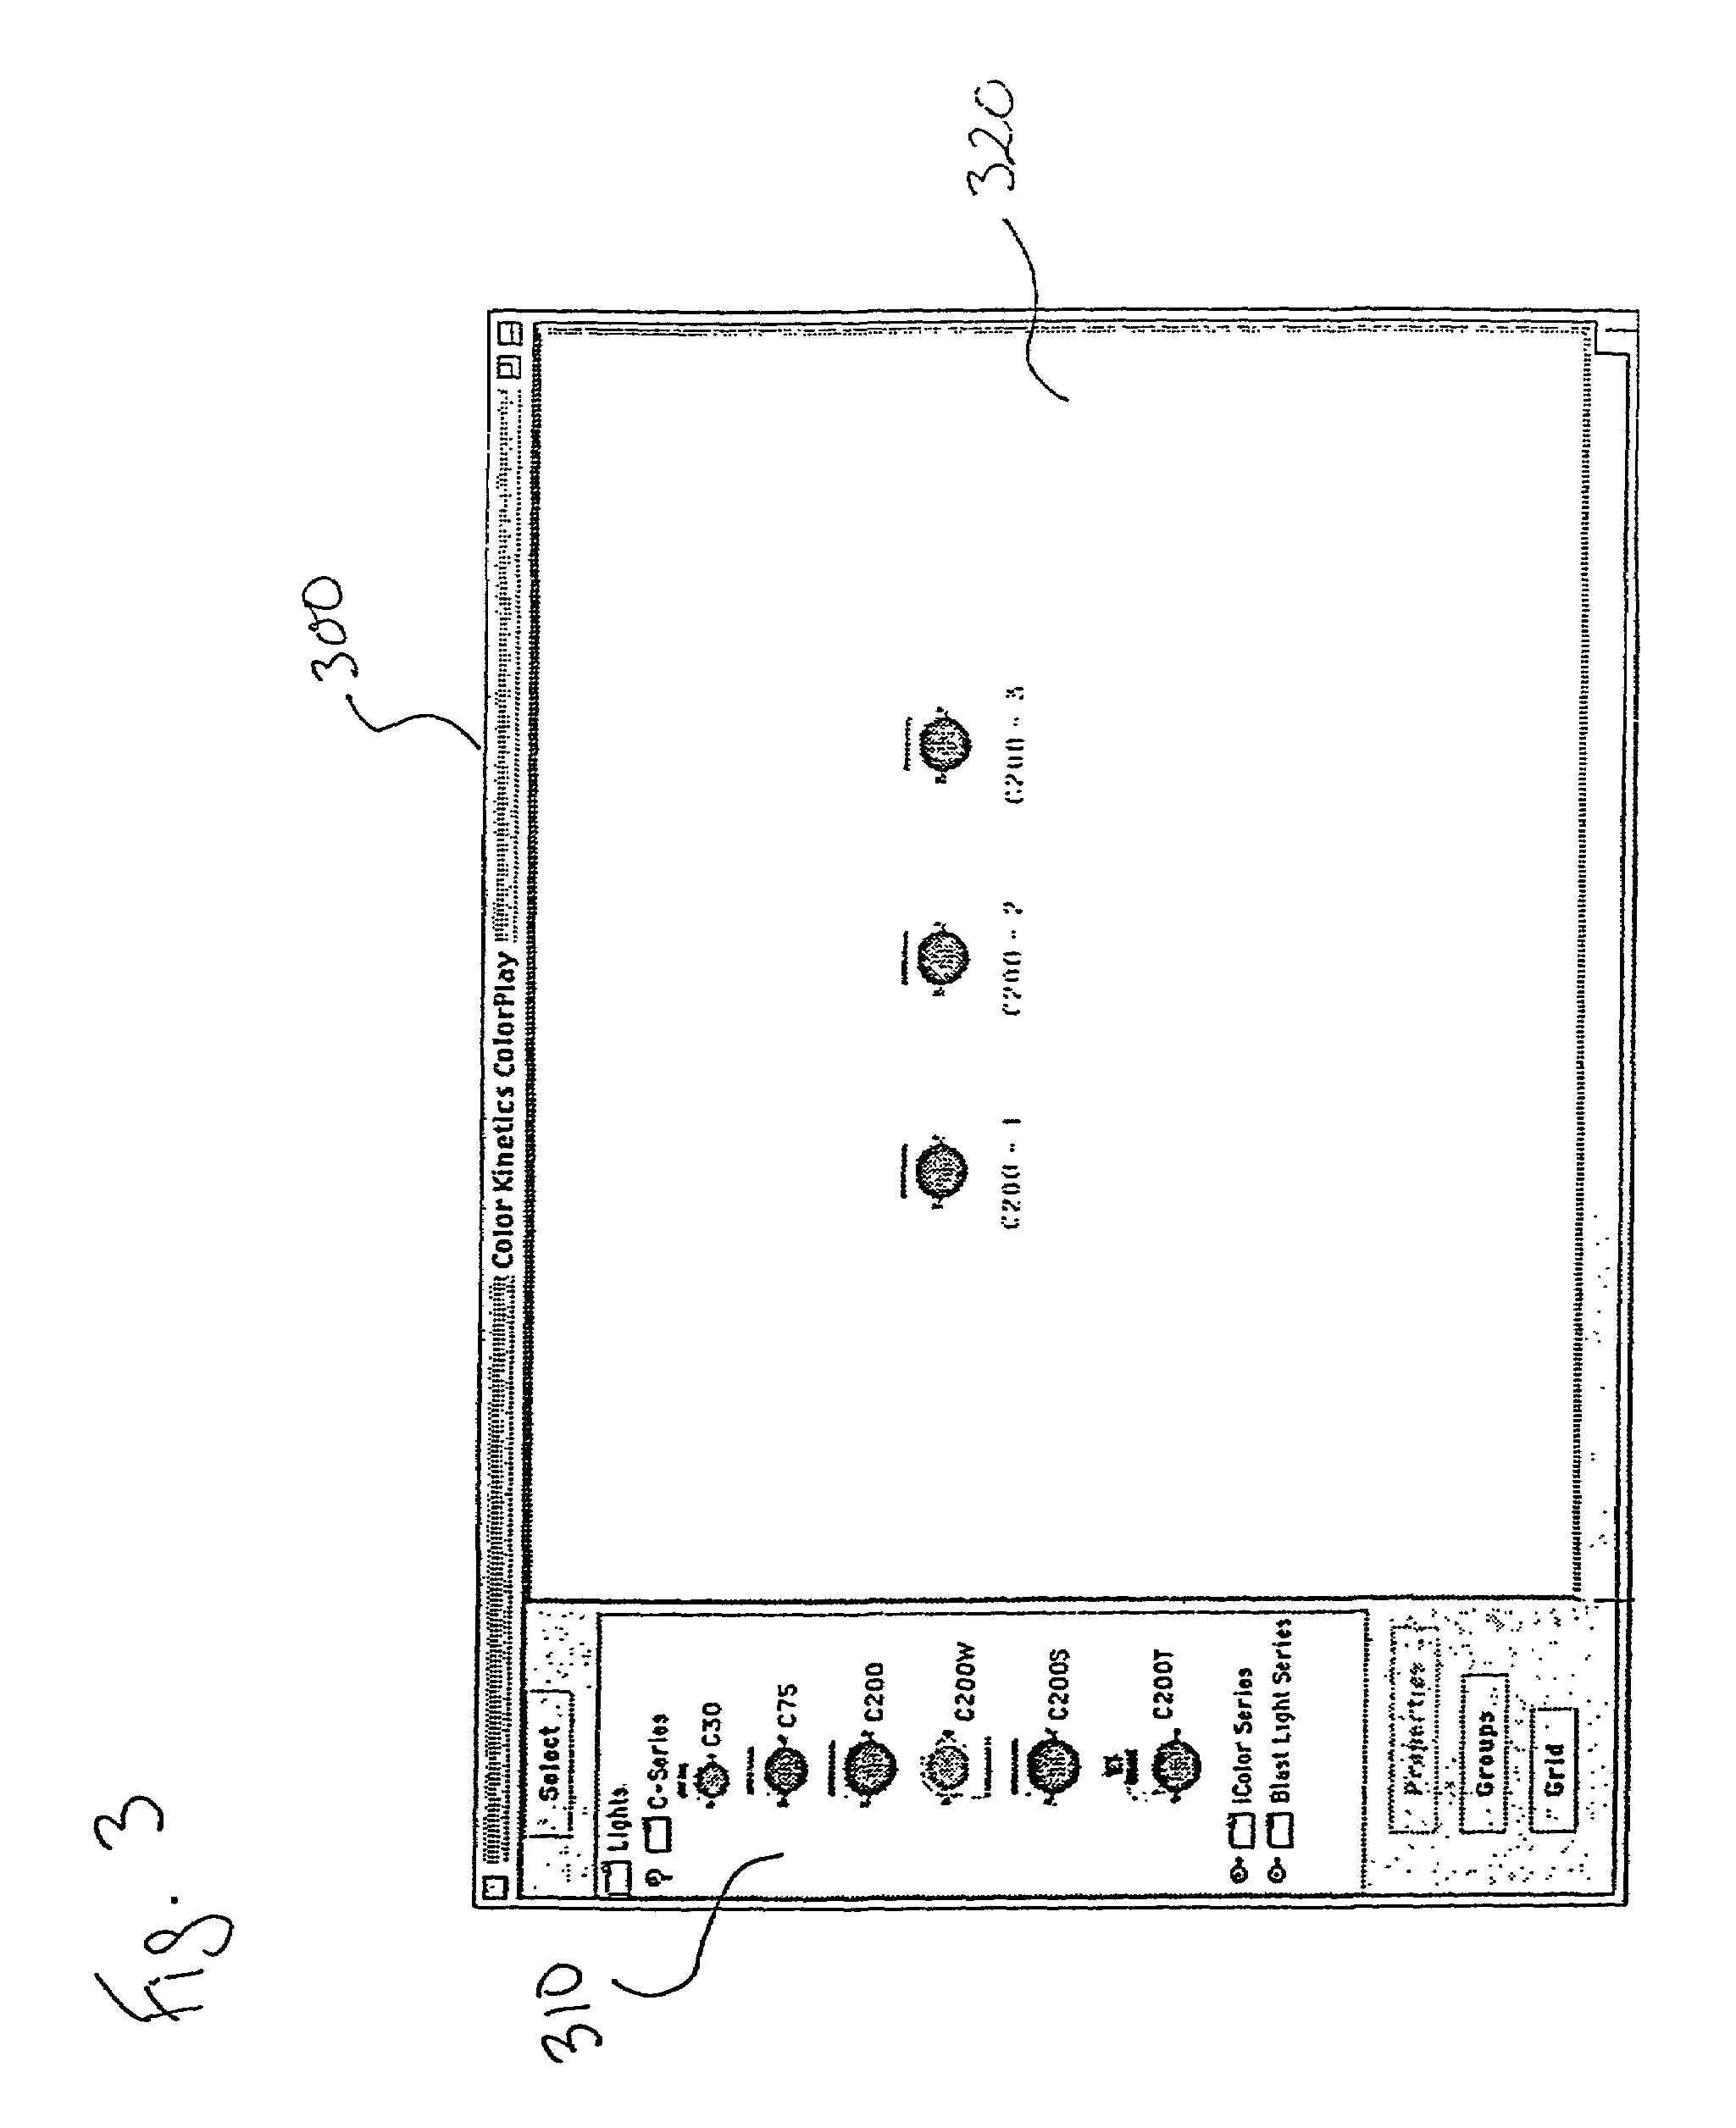 Method and apparatus for authoring and playing back lighting sequences